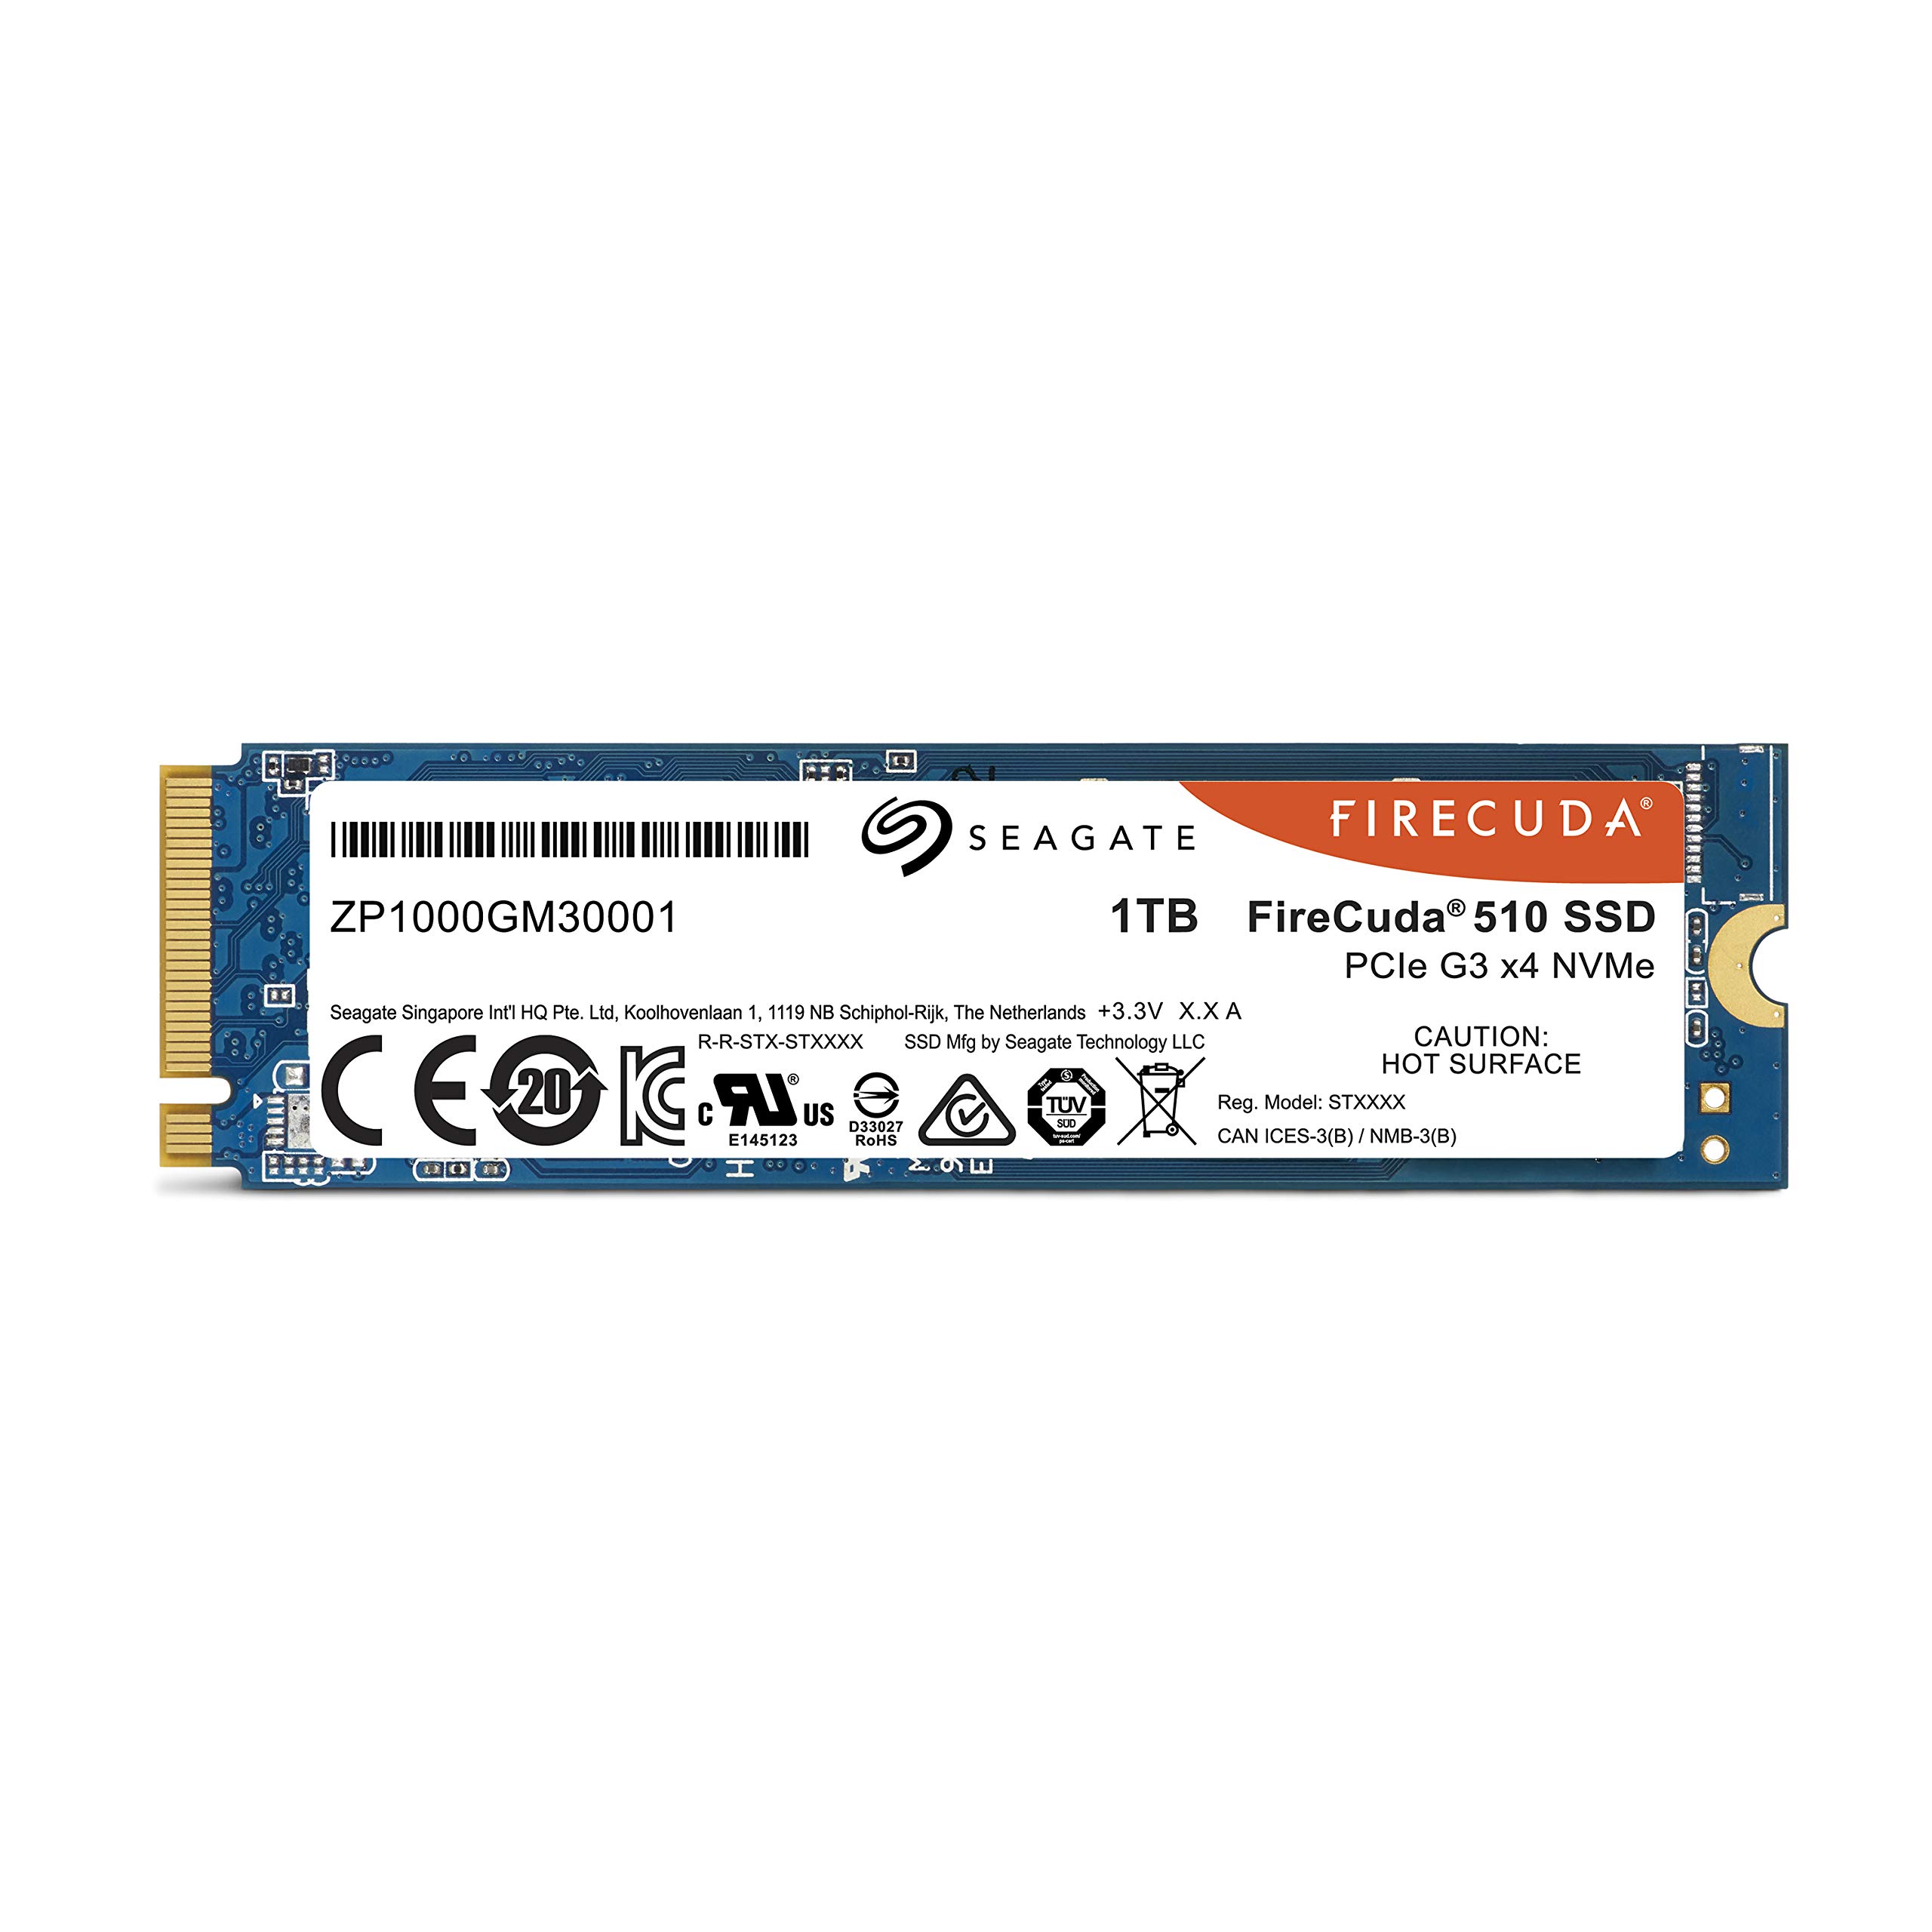 Seagate FireCuda 510 1TB Performance Internal Solid State Drive SSD PCIe Gen3 x4 NVMe 1.3 for Gaming PC Gaming Laptop Desktop (ZP1000GM30011)